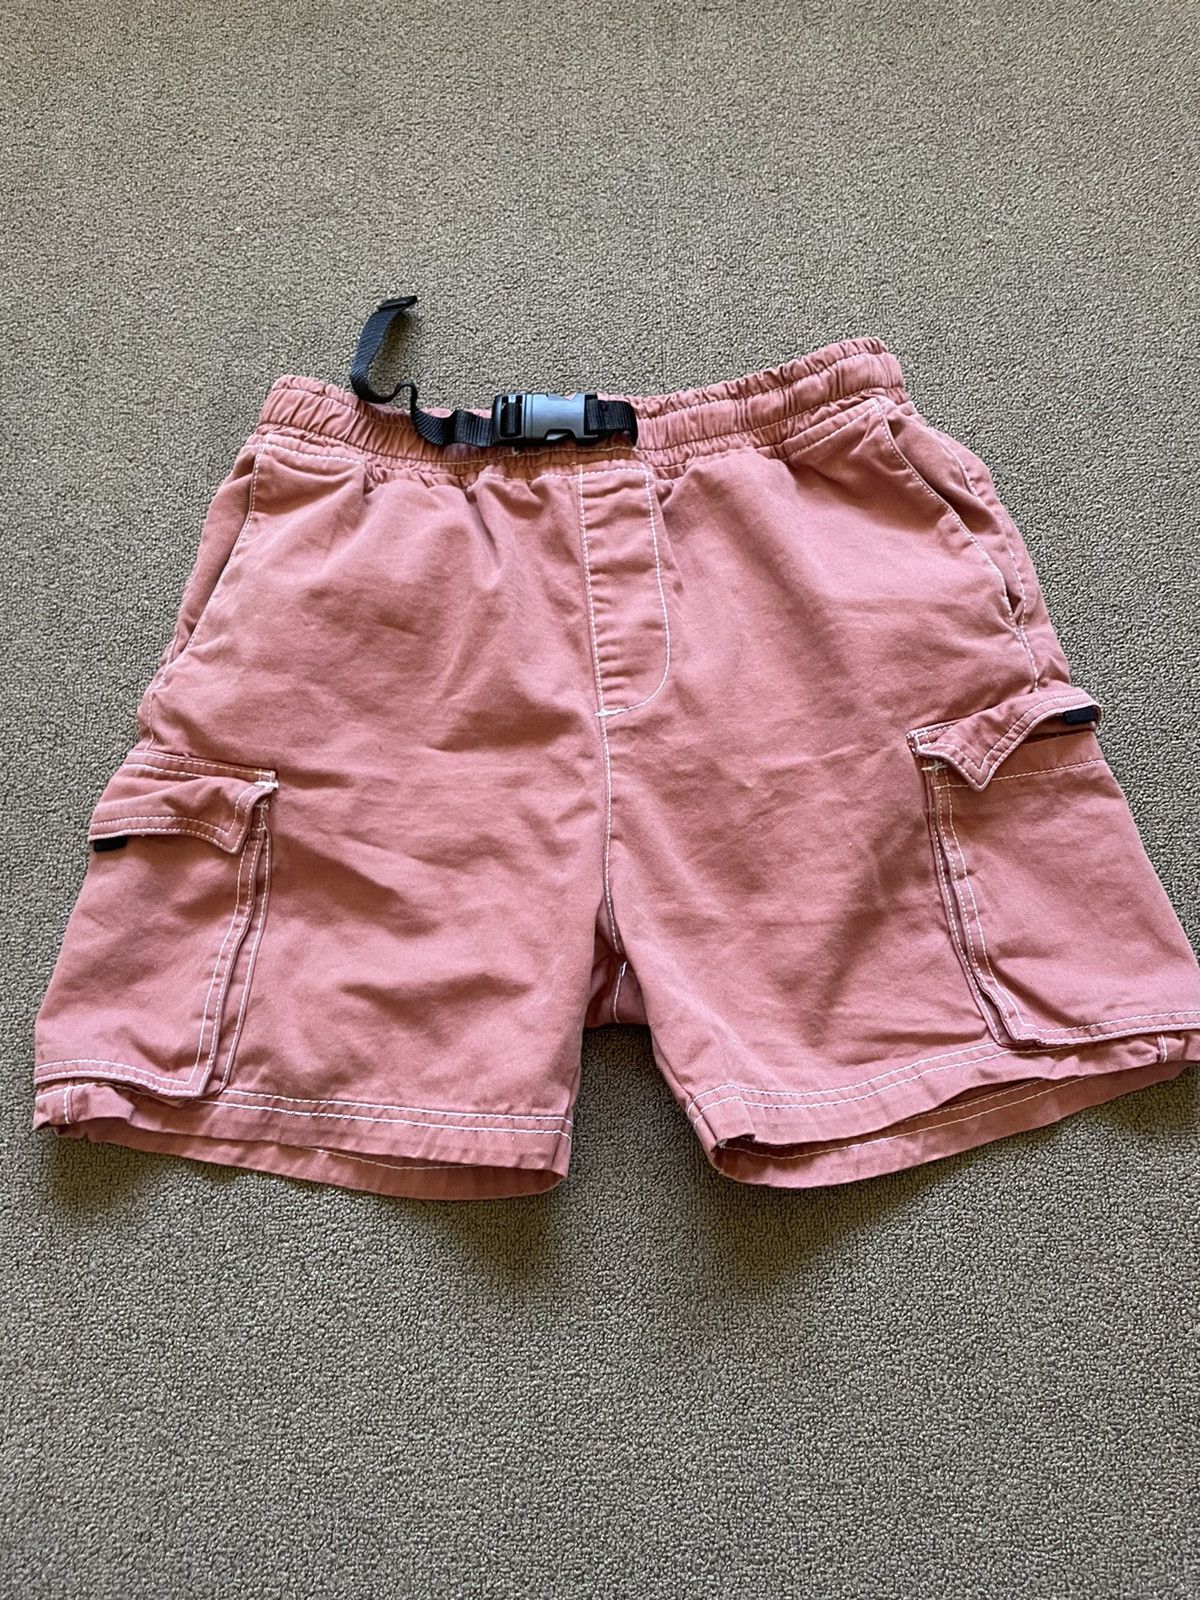 Urban Outfitters Sold Out Cargo Shorts Size US 32 / EU 48 - 1 Preview